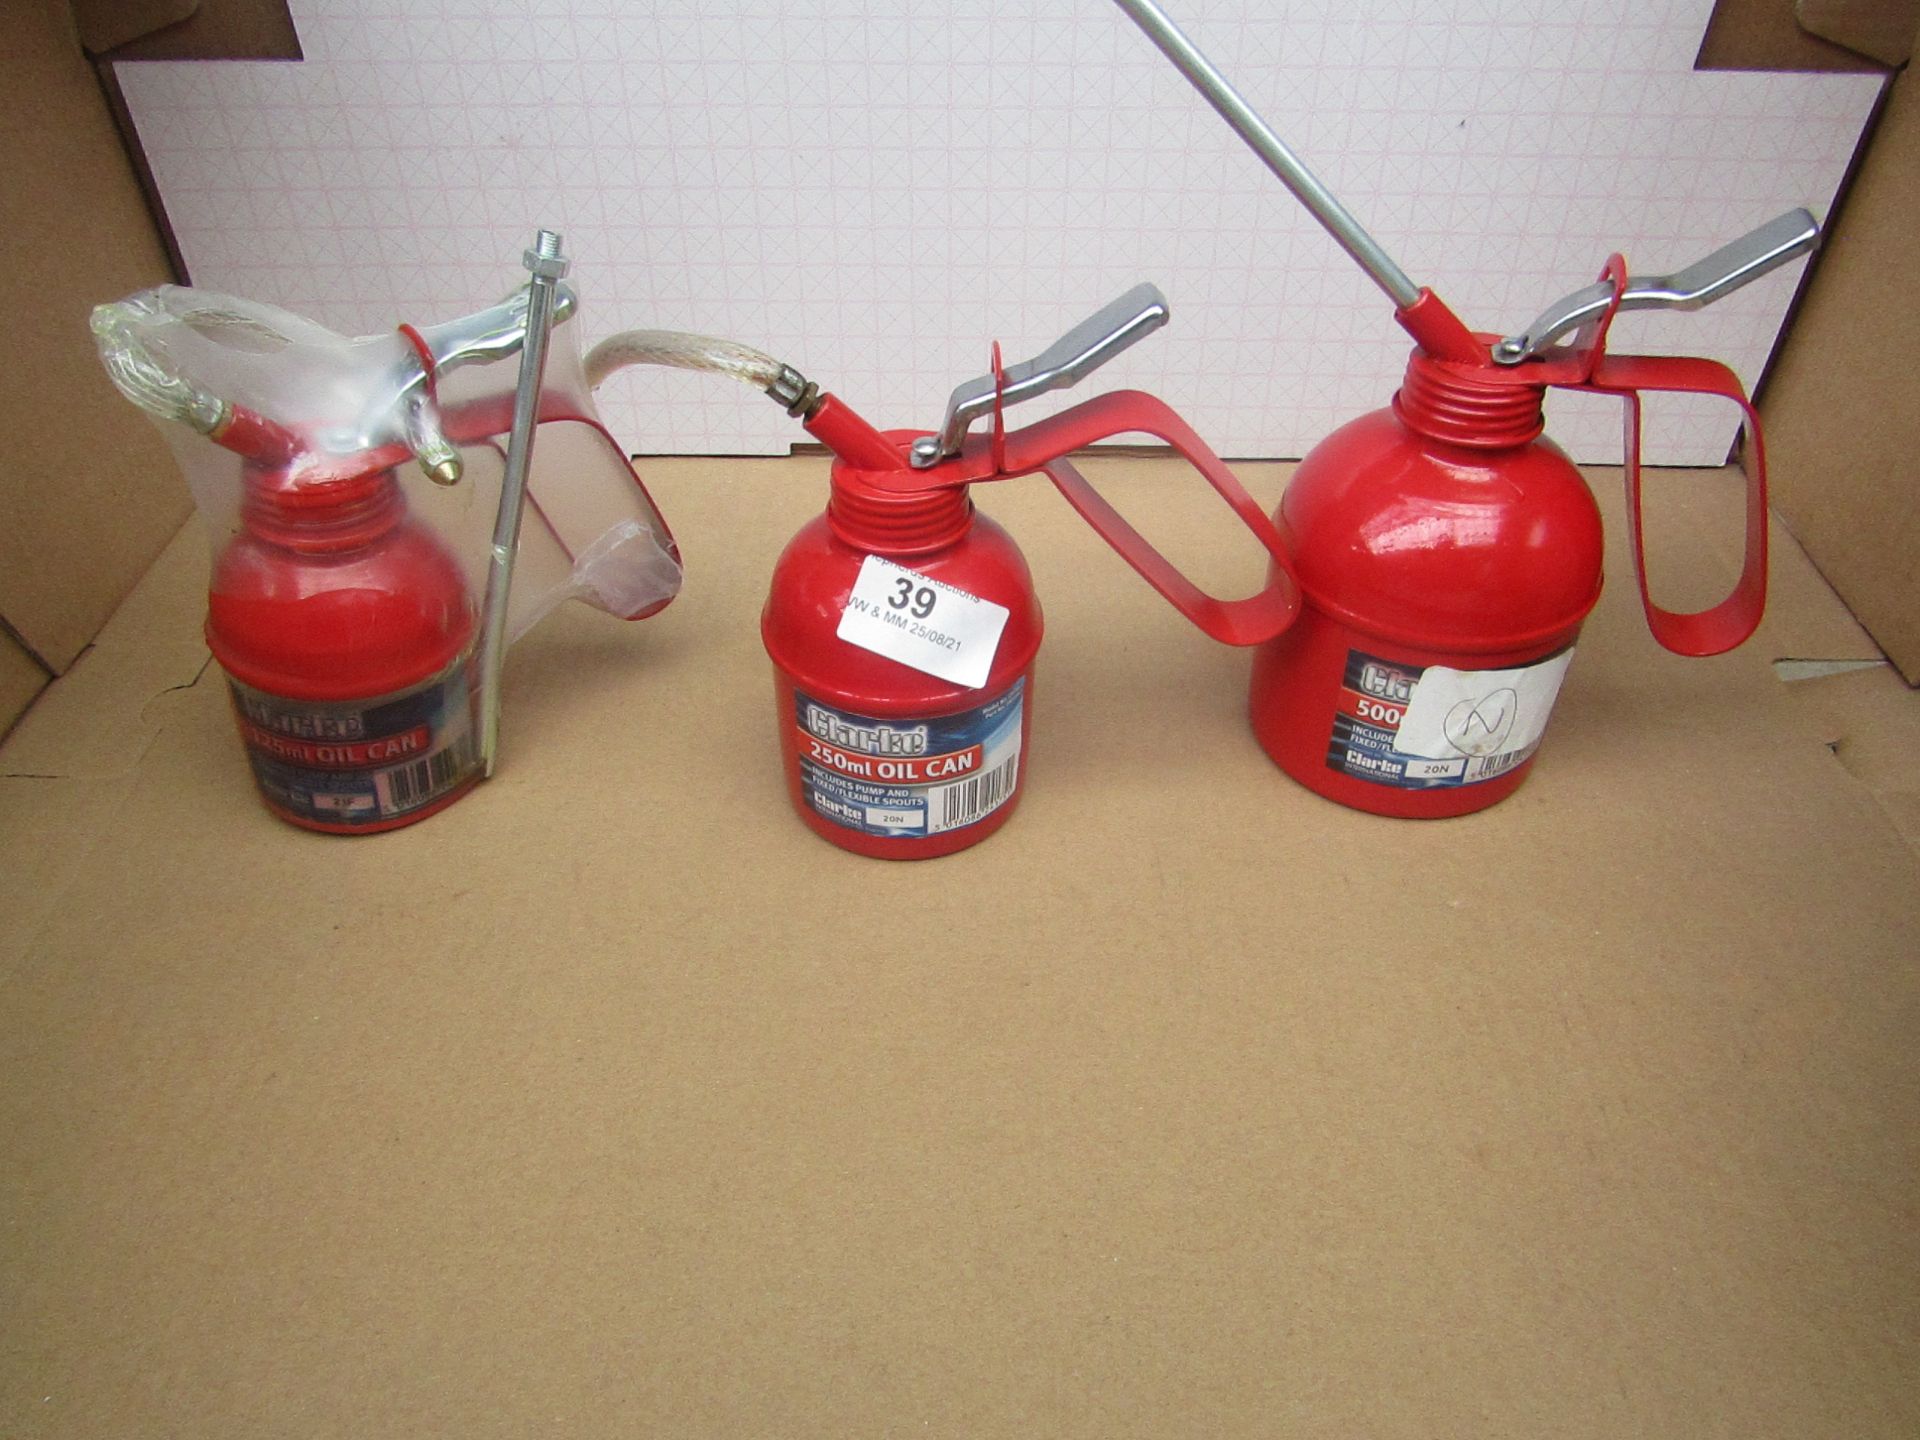 1x CL 250ML OIL CAN CHT843, 1x CL 125ML OIL CAN CHT842, 1x CL 500ML OIL CAN CHT844, This lot is a